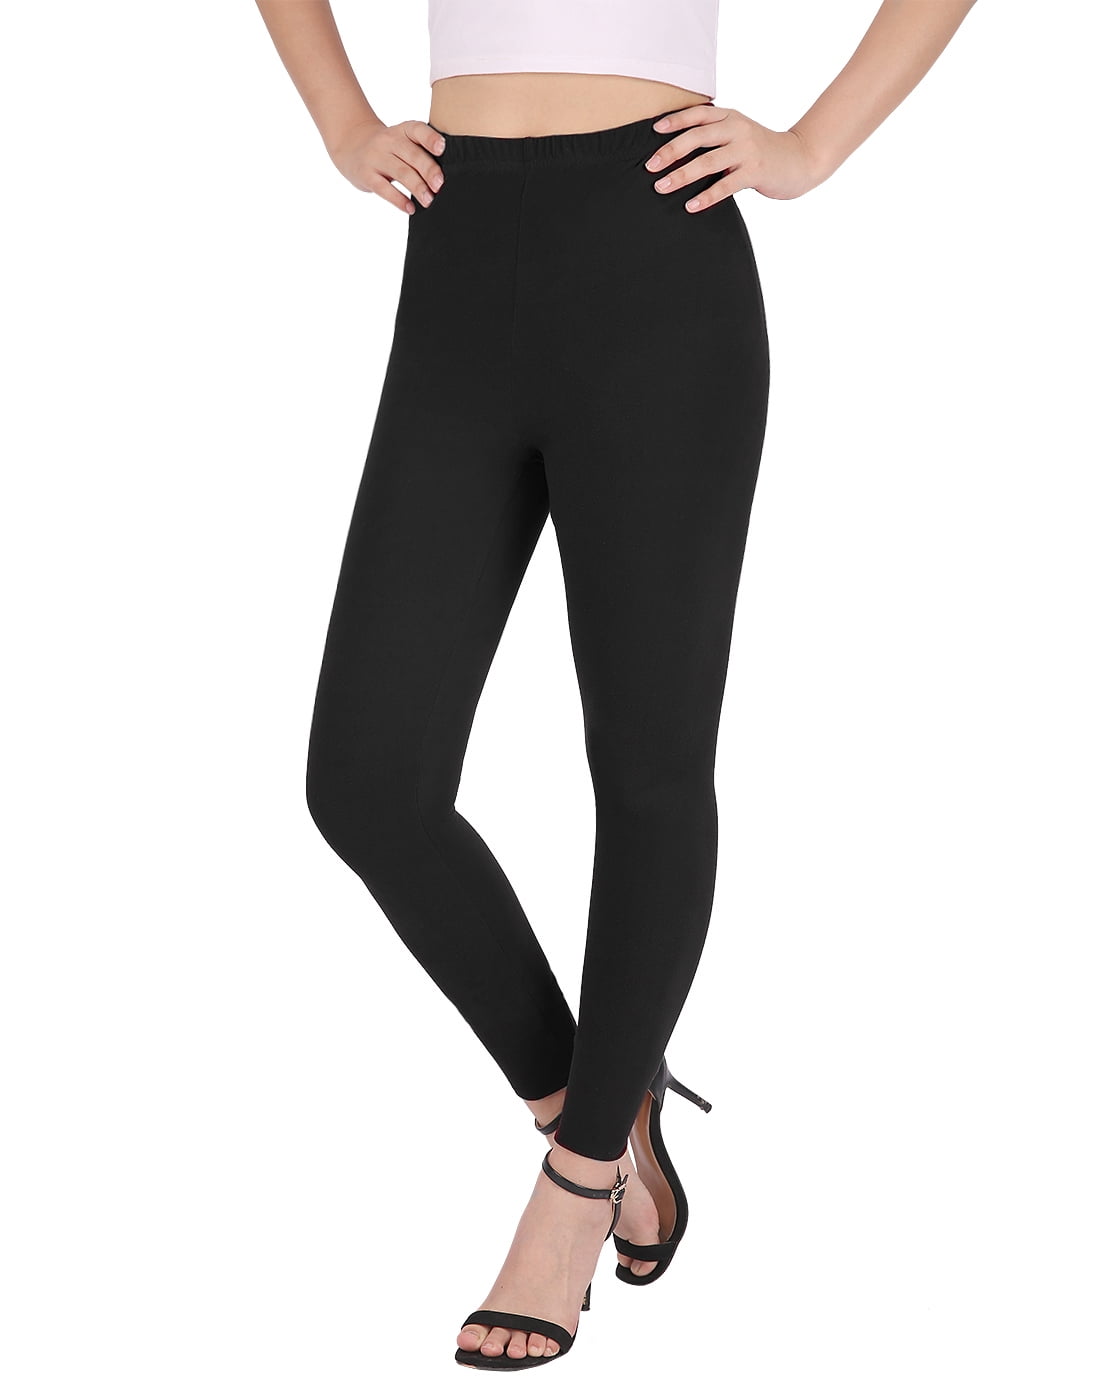 HDE - HDE Women Solid Black Leggings Plus Size Tight Stretch Pants for ...